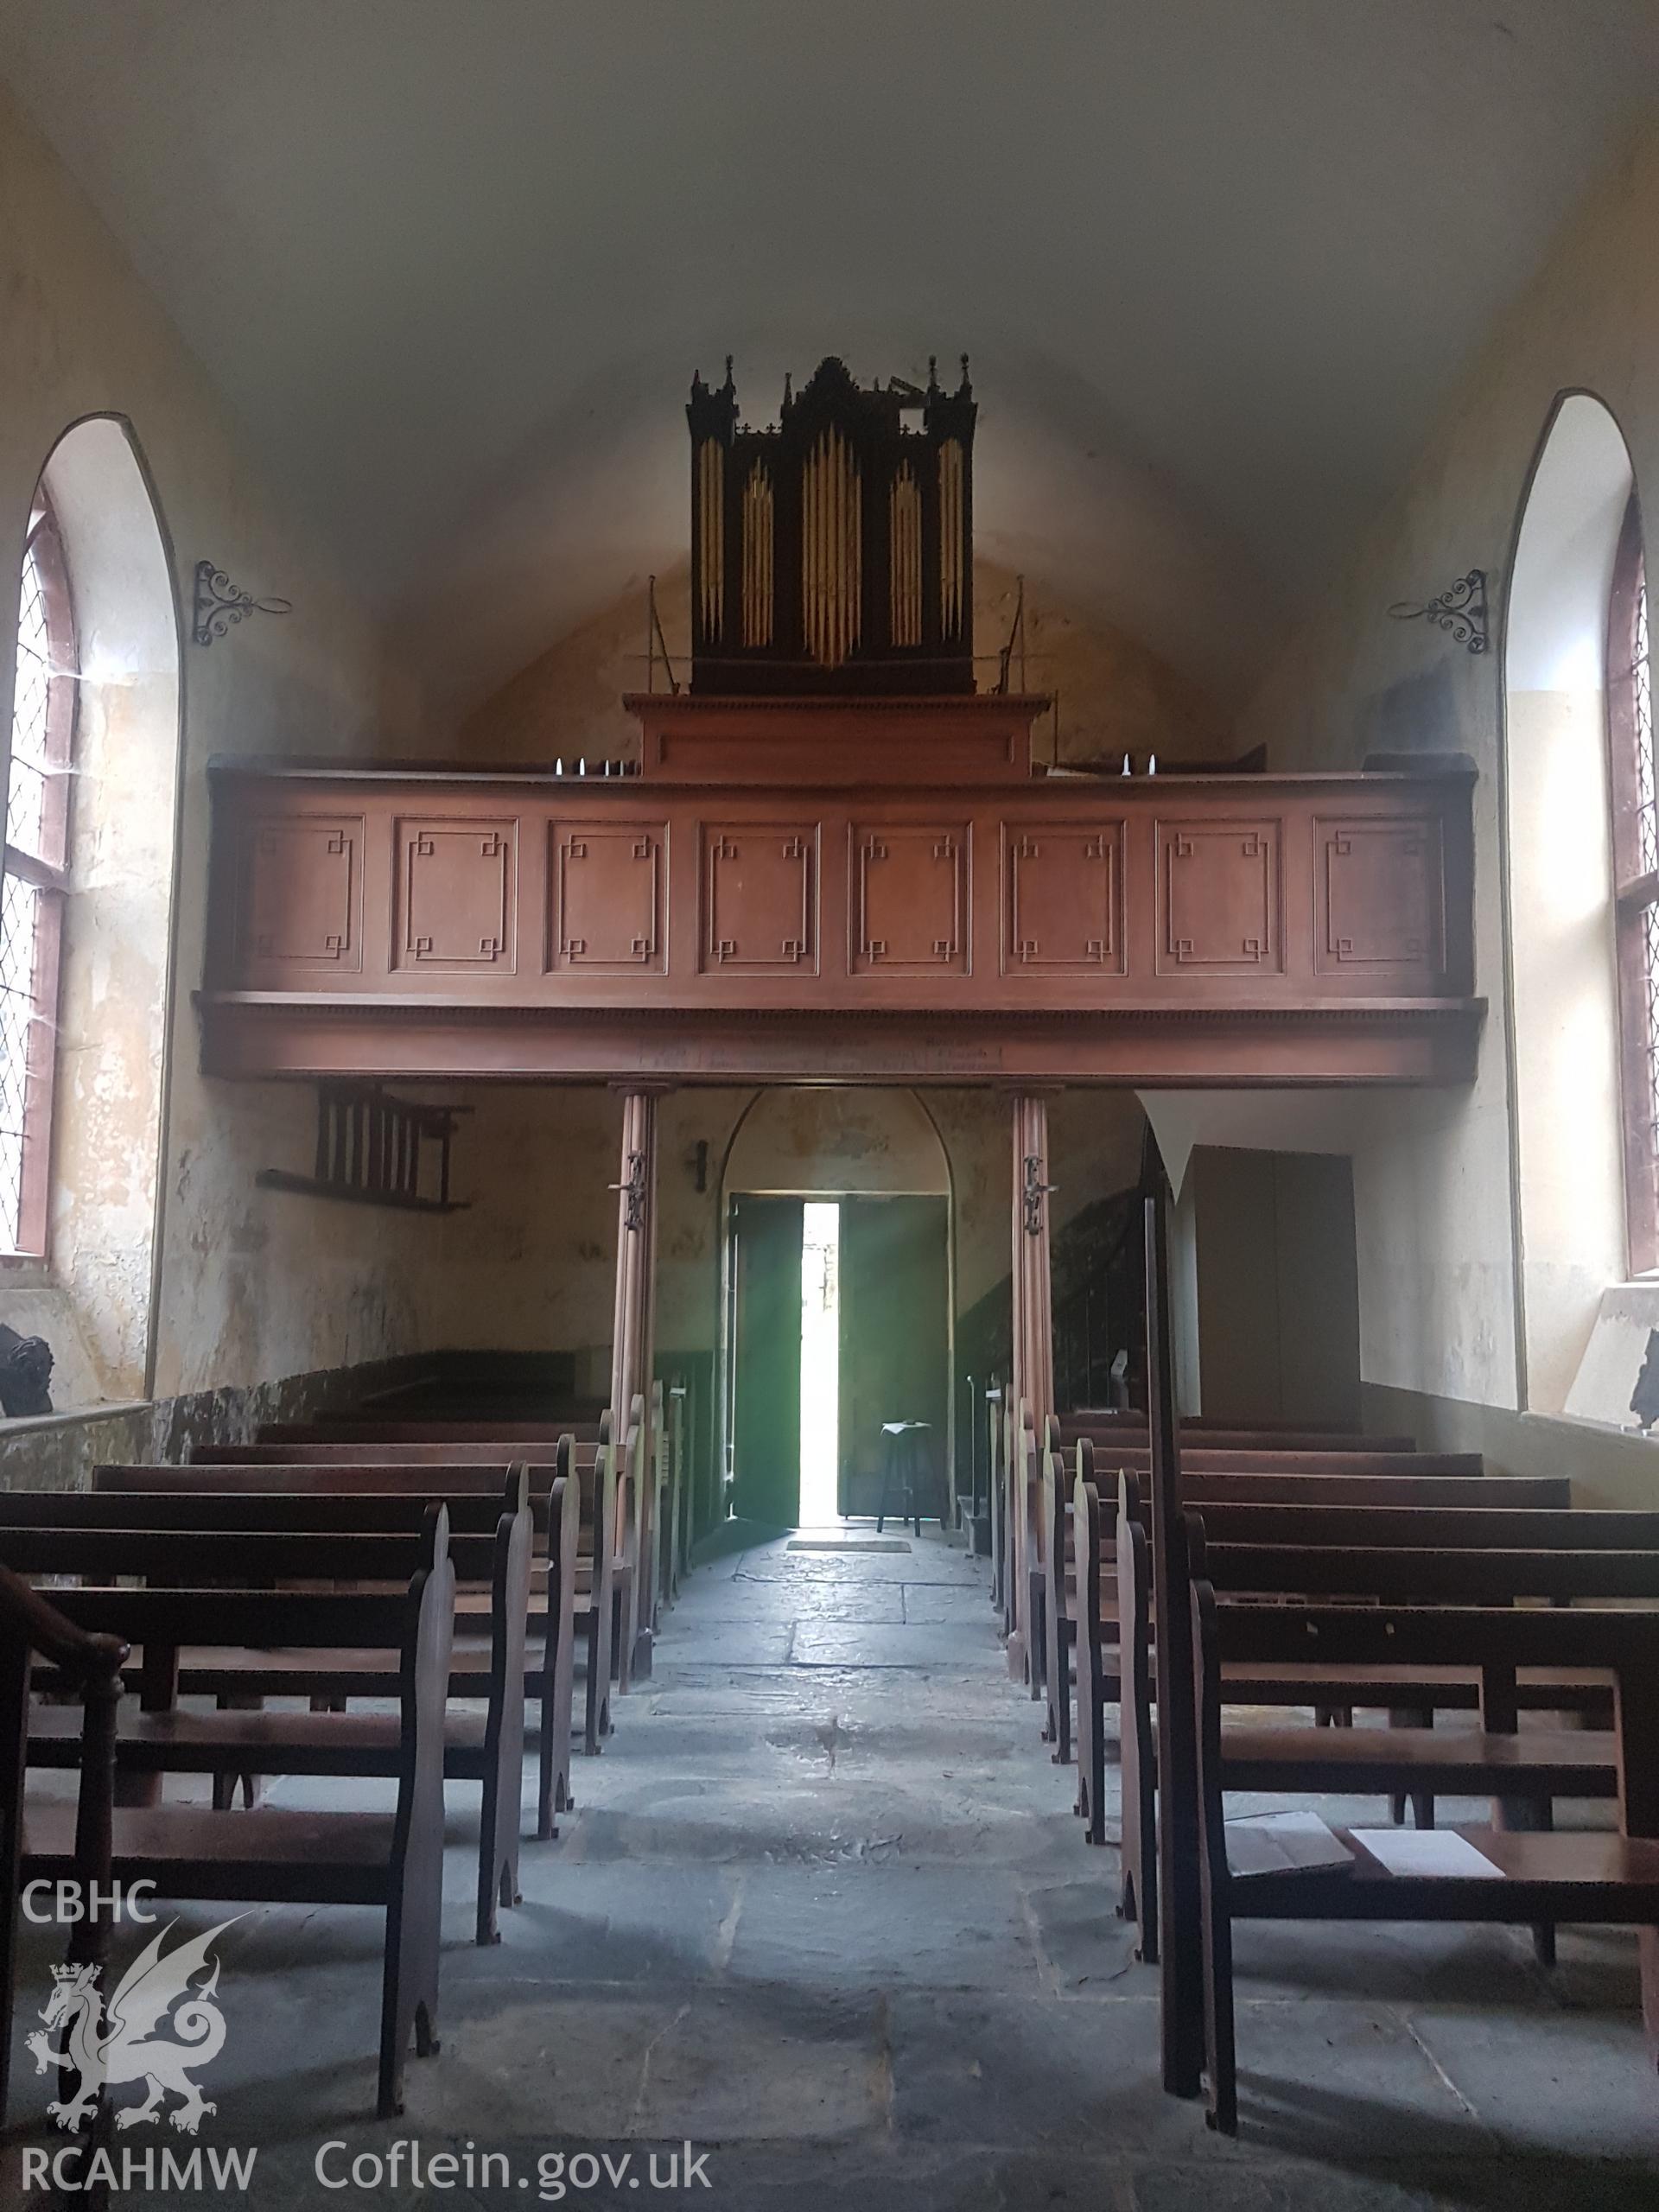 Flight and Robson chamber organ, St Cynhaiarn church. Photographed by Helen Rowe of RCAHMW on 10th October 2020.